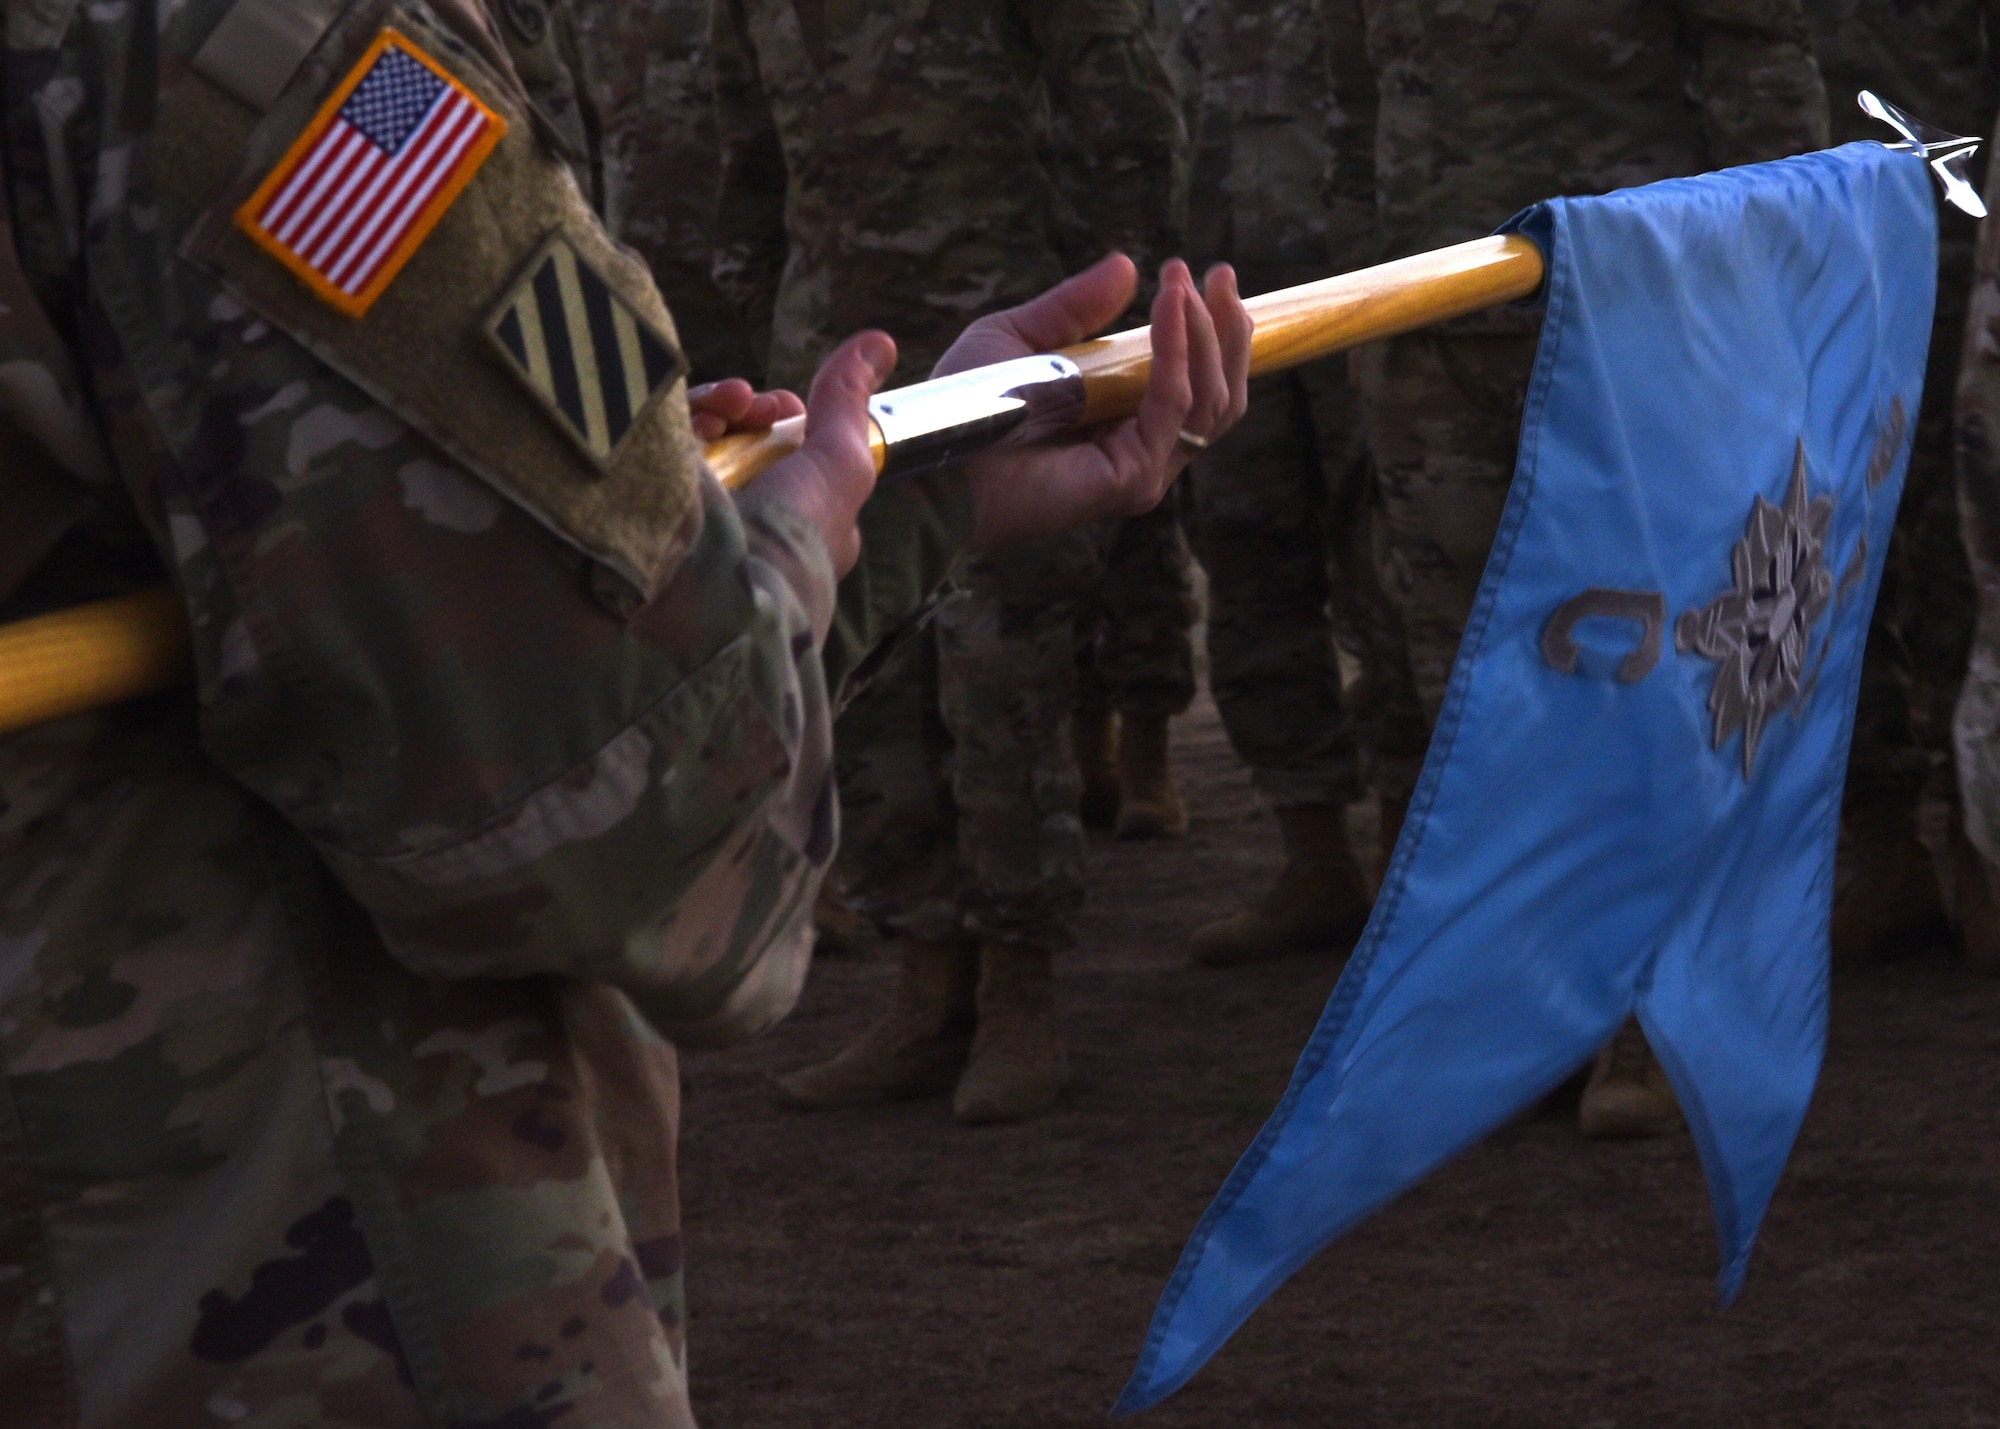 U.S. Army Lt. Col. Brian Ryan, 344th Military Intelligence Battalion commander, unrolls the Charlie Company Guidon at the Activation Ceremony and Assumption of Command on the parade field at Goodfellow Air Force Base, Texas, Jan. 24, 2019. Ryan prepared to pass the Guidon, which signifies him transferring his trust and the responsibility of the company’s enlisted members. (U.S. Air Force photo by Airman 1st Class Abbey Rieves)